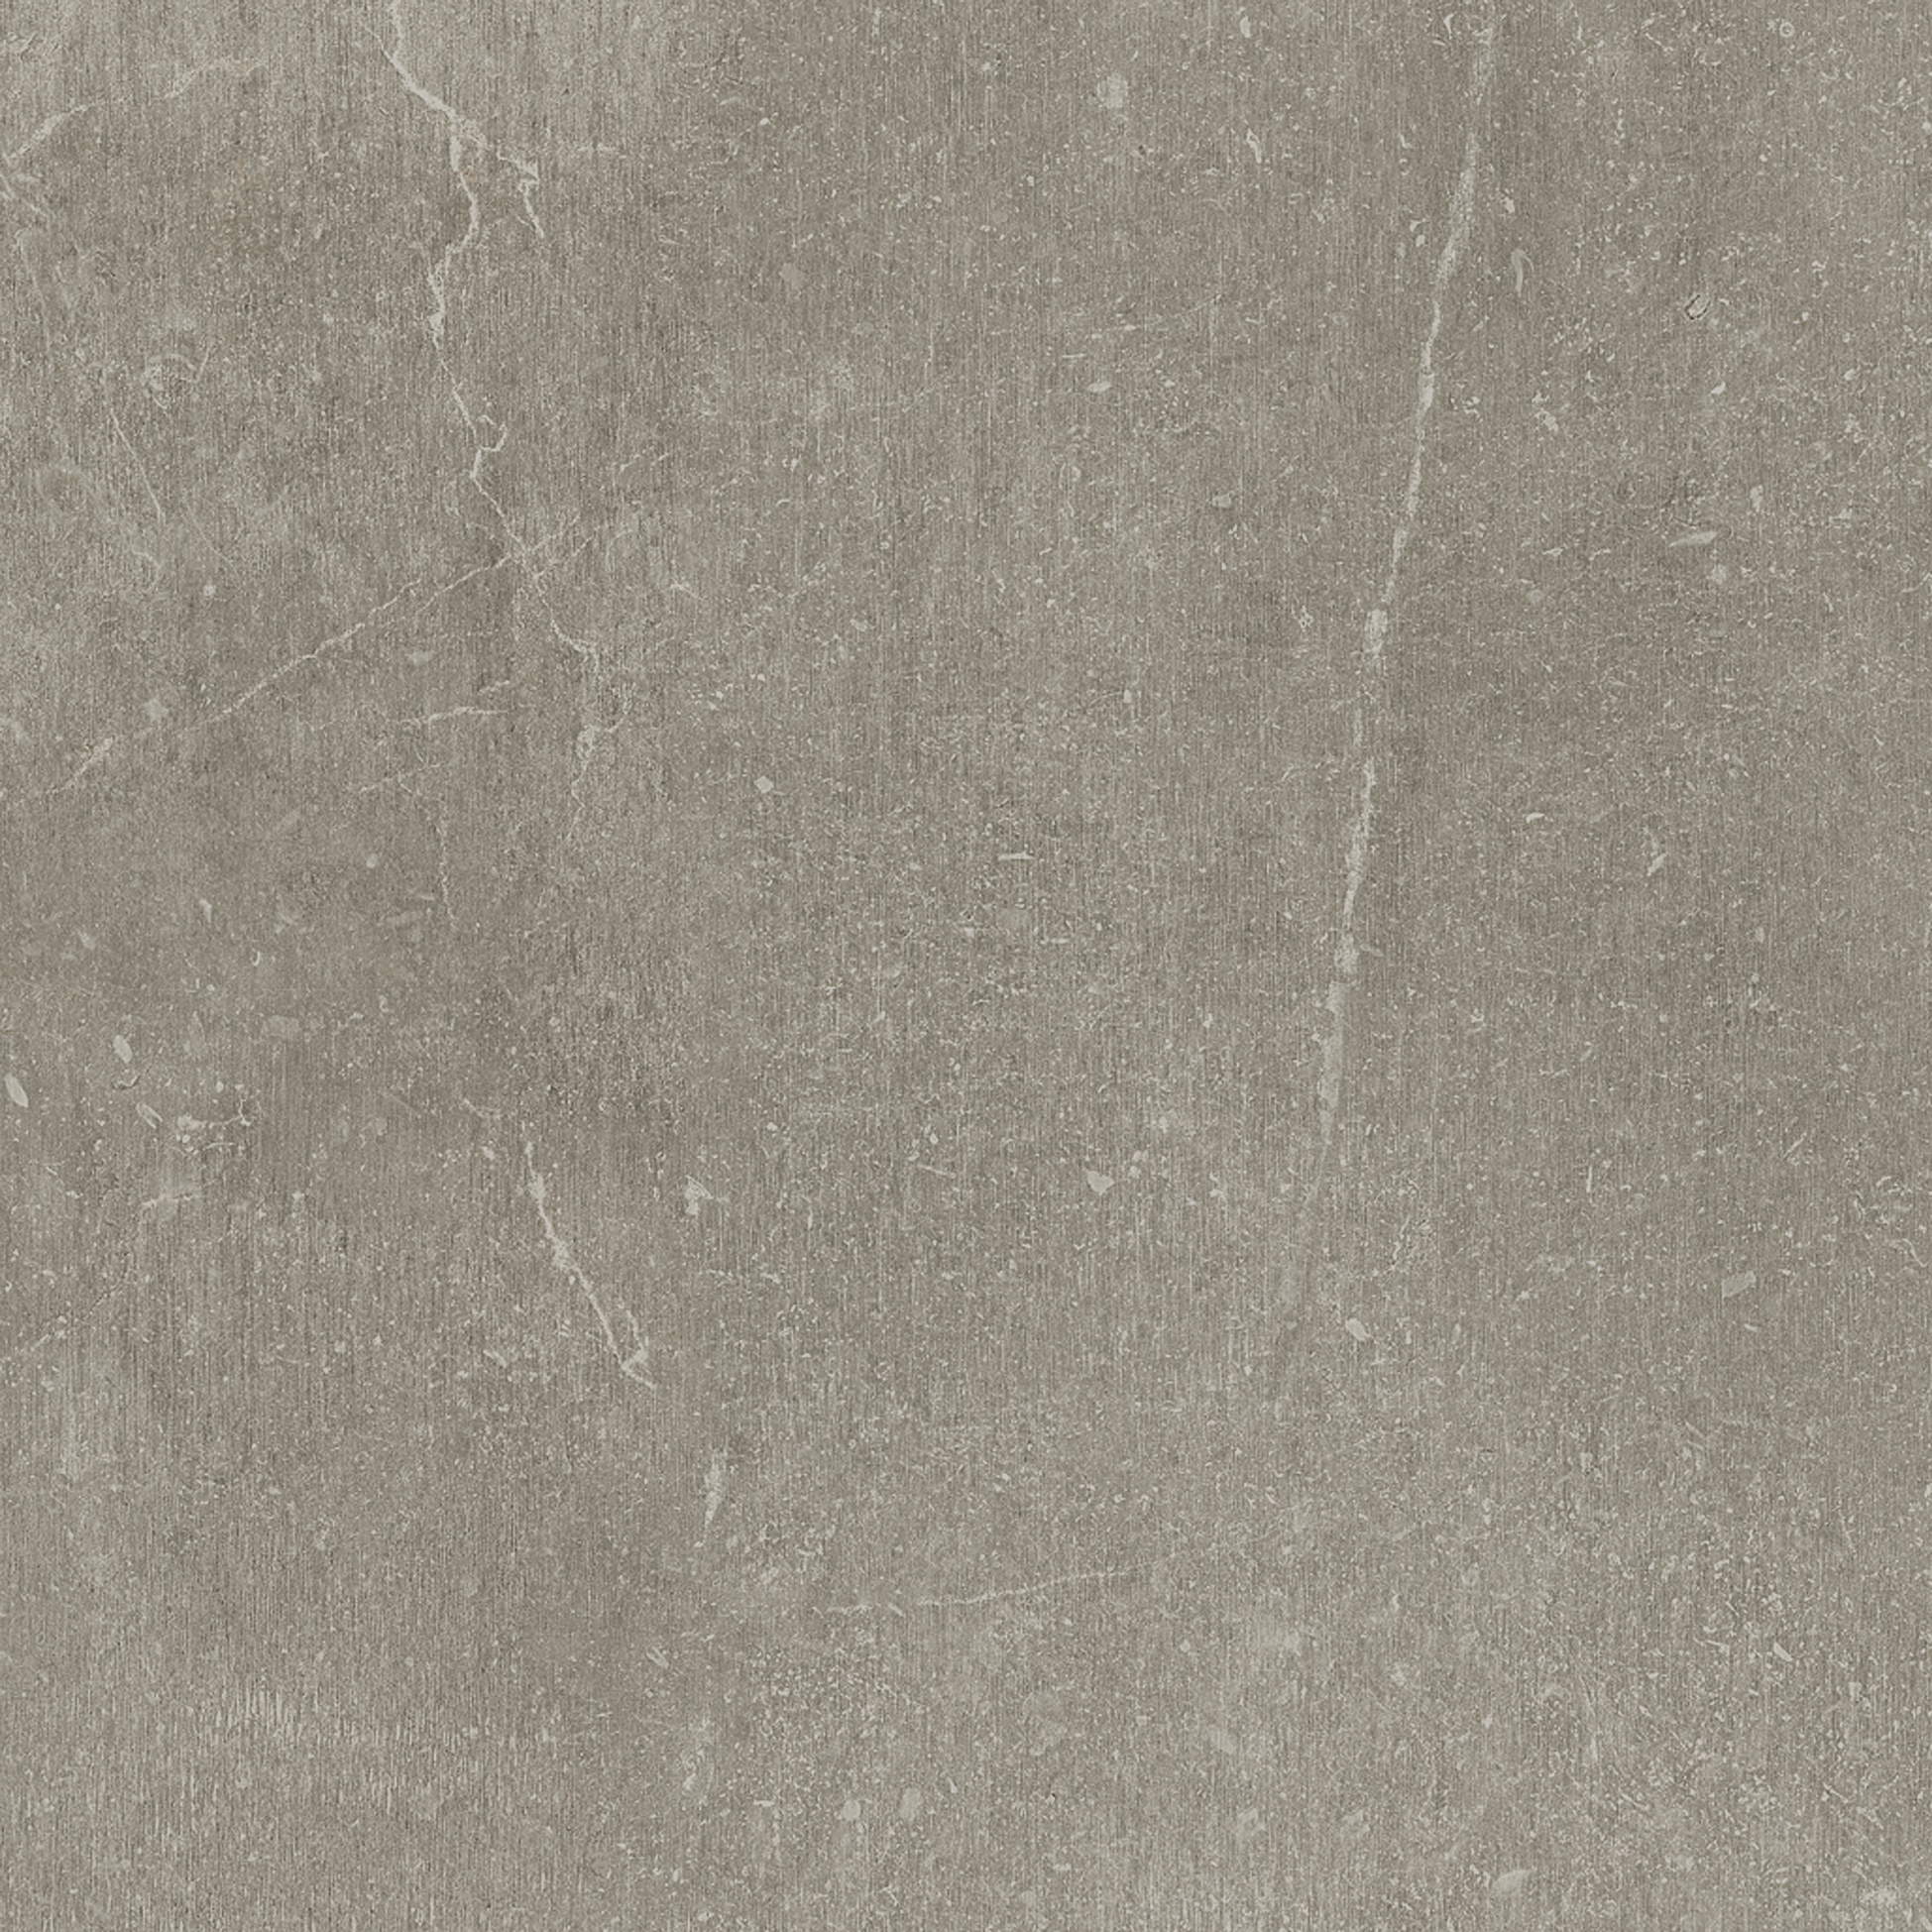 clay pattern glazed porcelain field tile from nexus anatolia collection distributed by surface group international matte finish pressed edge 13x13 square shape